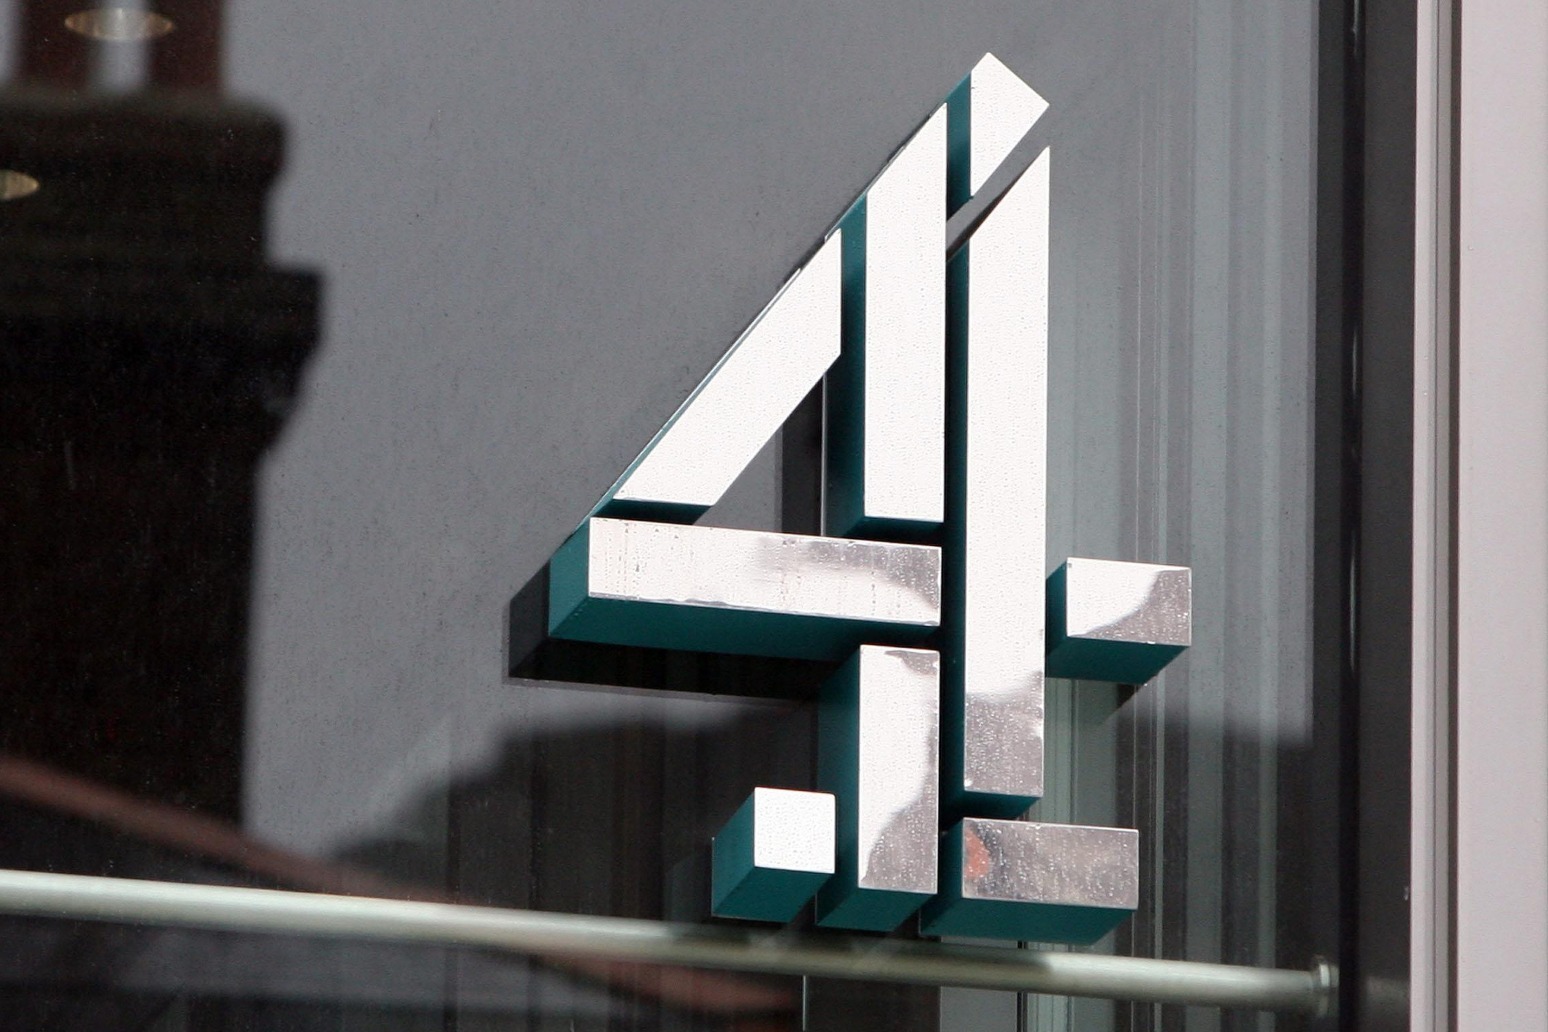 Channel 4 privatisation ‘ends restriction on producing and selling own content’ 